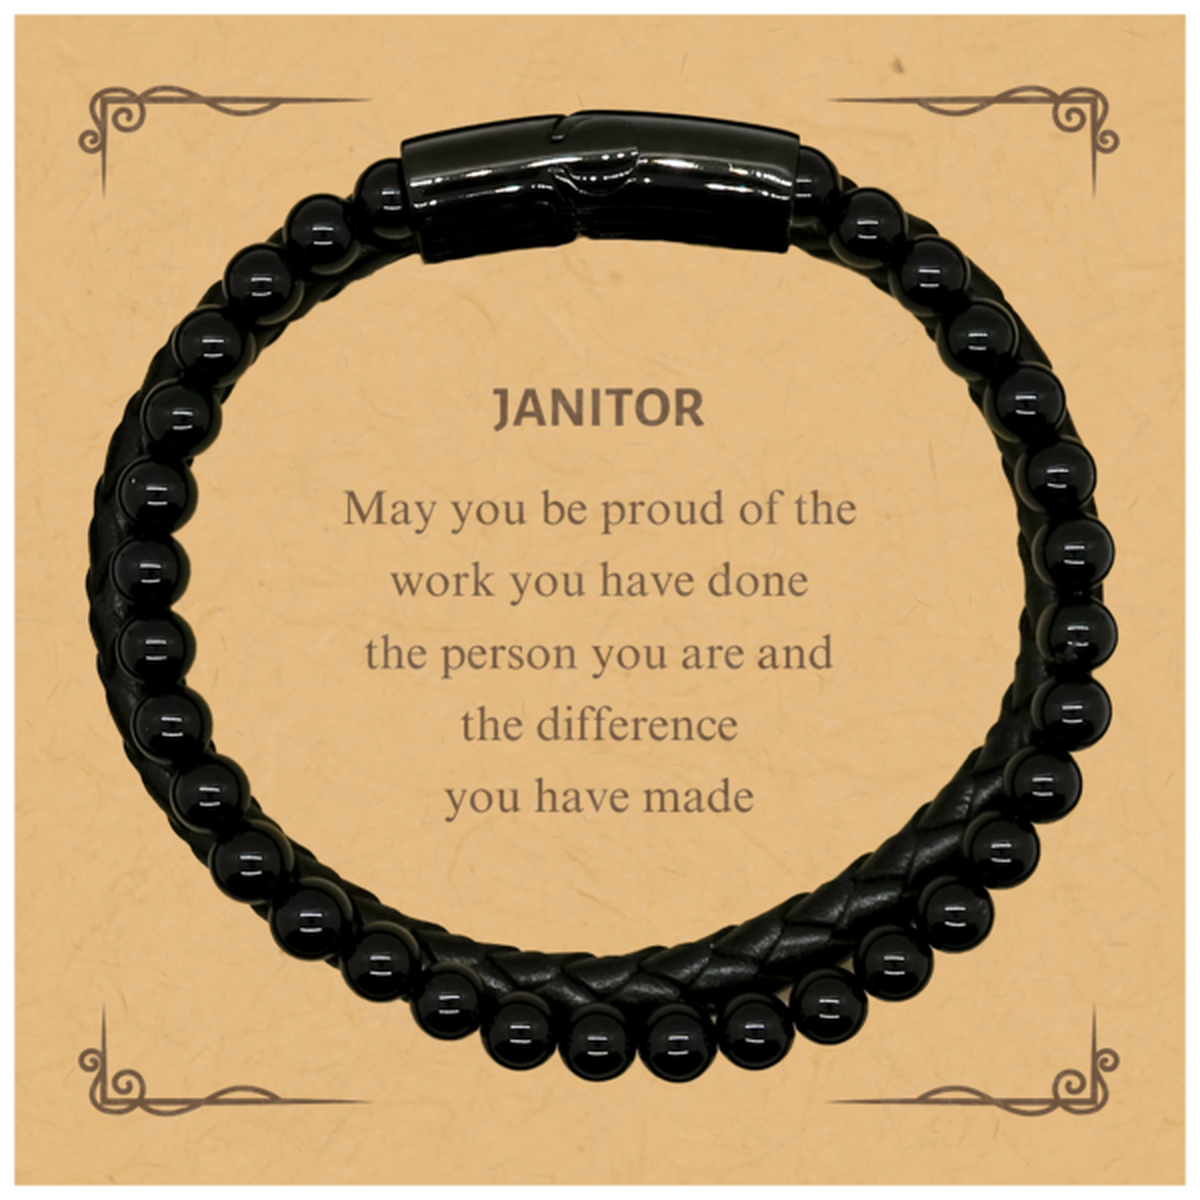 Janitor May you be proud of the work you have done, Retirement Janitor Stone Leather Bracelets for Colleague Appreciation Gifts Amazing for Janitor